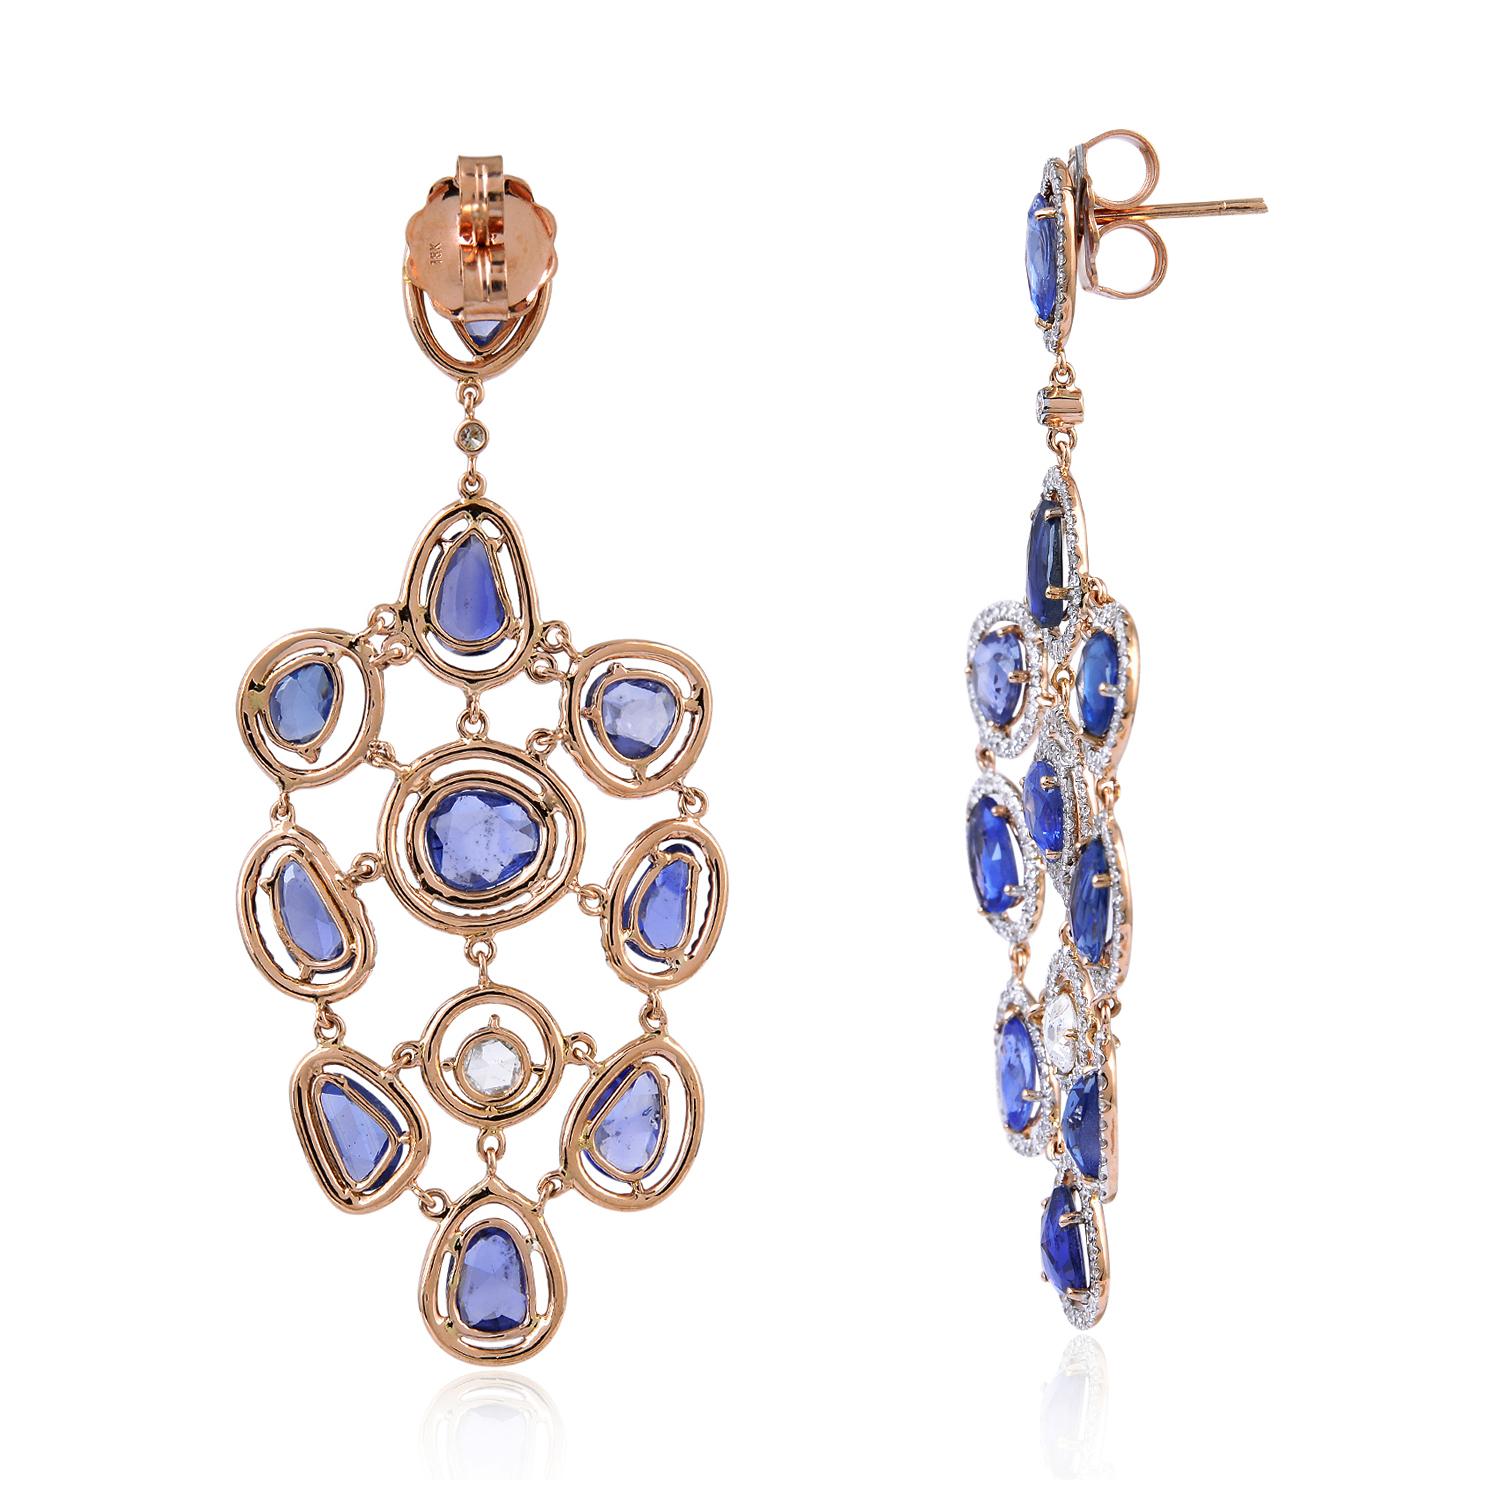 Cast from 18-karat gold, these beautiful drop earrings are set in 13.34 carats sapphire and 3.4 carats of glimmering diamonds. 

FOLLOW  MEGHNA JEWELS storefront to view the latest collection & exclusive pieces.  Meghna Jewels is proudly rated as a